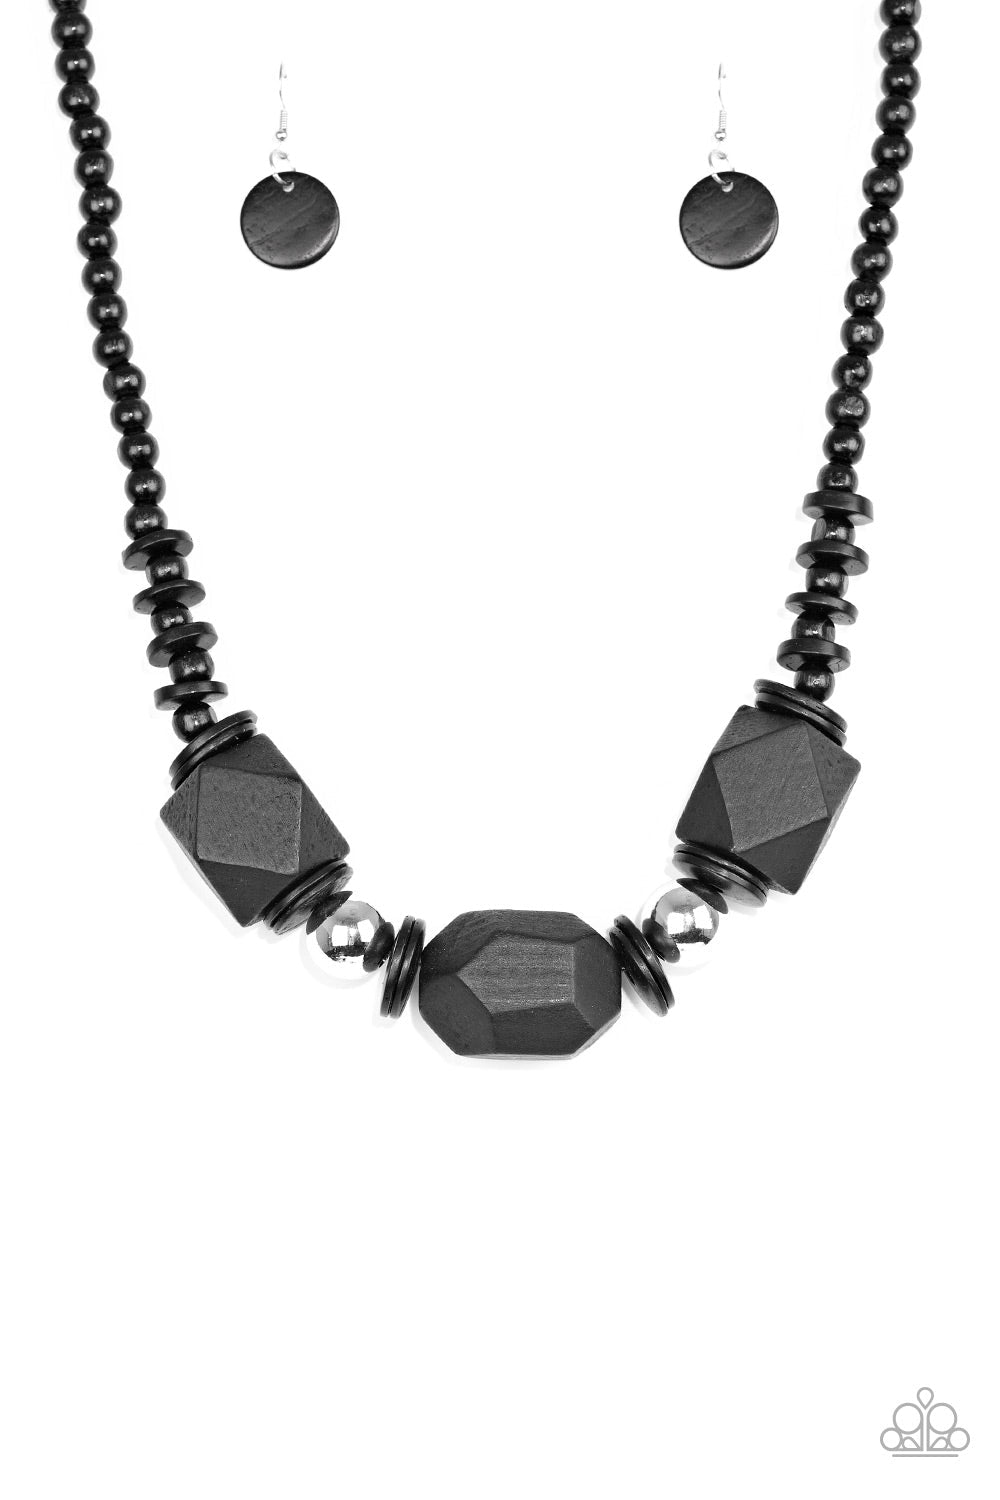 Costa Maya Majesty - Black Wood Necklace - Paparazzi Accessories - Featuring abstract geometric finishes, mismatched black wooden beads are threaded along shiny black cording. Dramatic silver beads are sprinkled between the earthy beading, creating a bold seasonal look below the collar. Features a button loop closure fashion necklace.